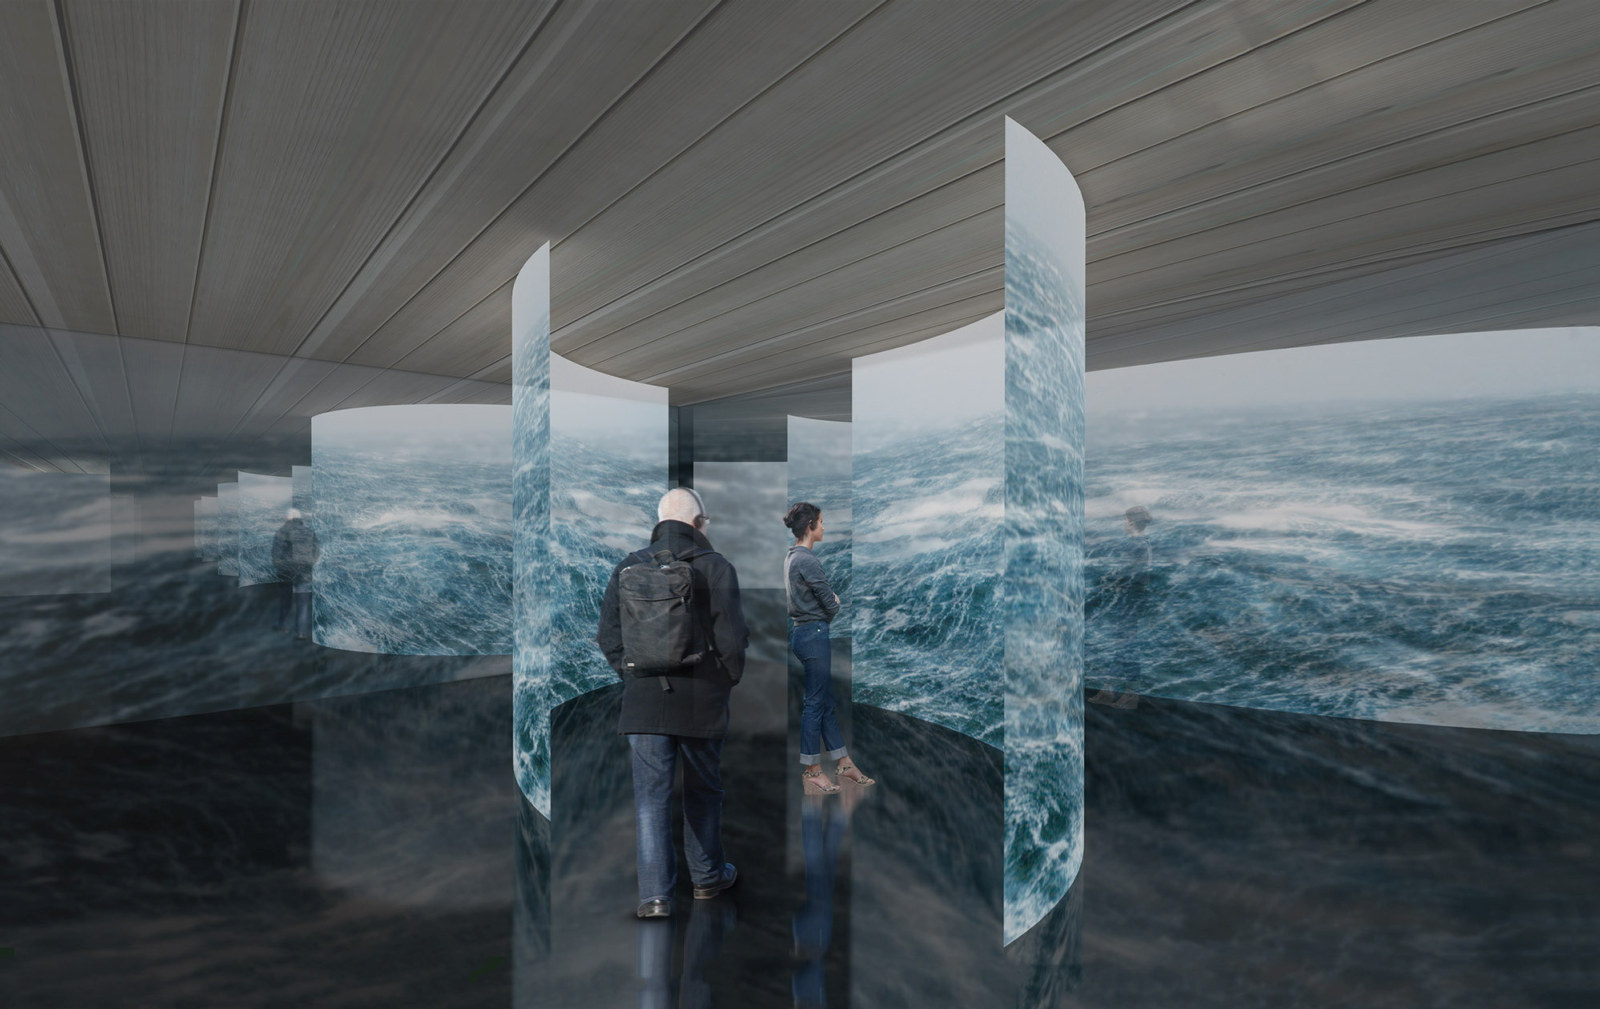 Artist's rendition of series of curved blue ceiling to floor panels with people in middle for scale.